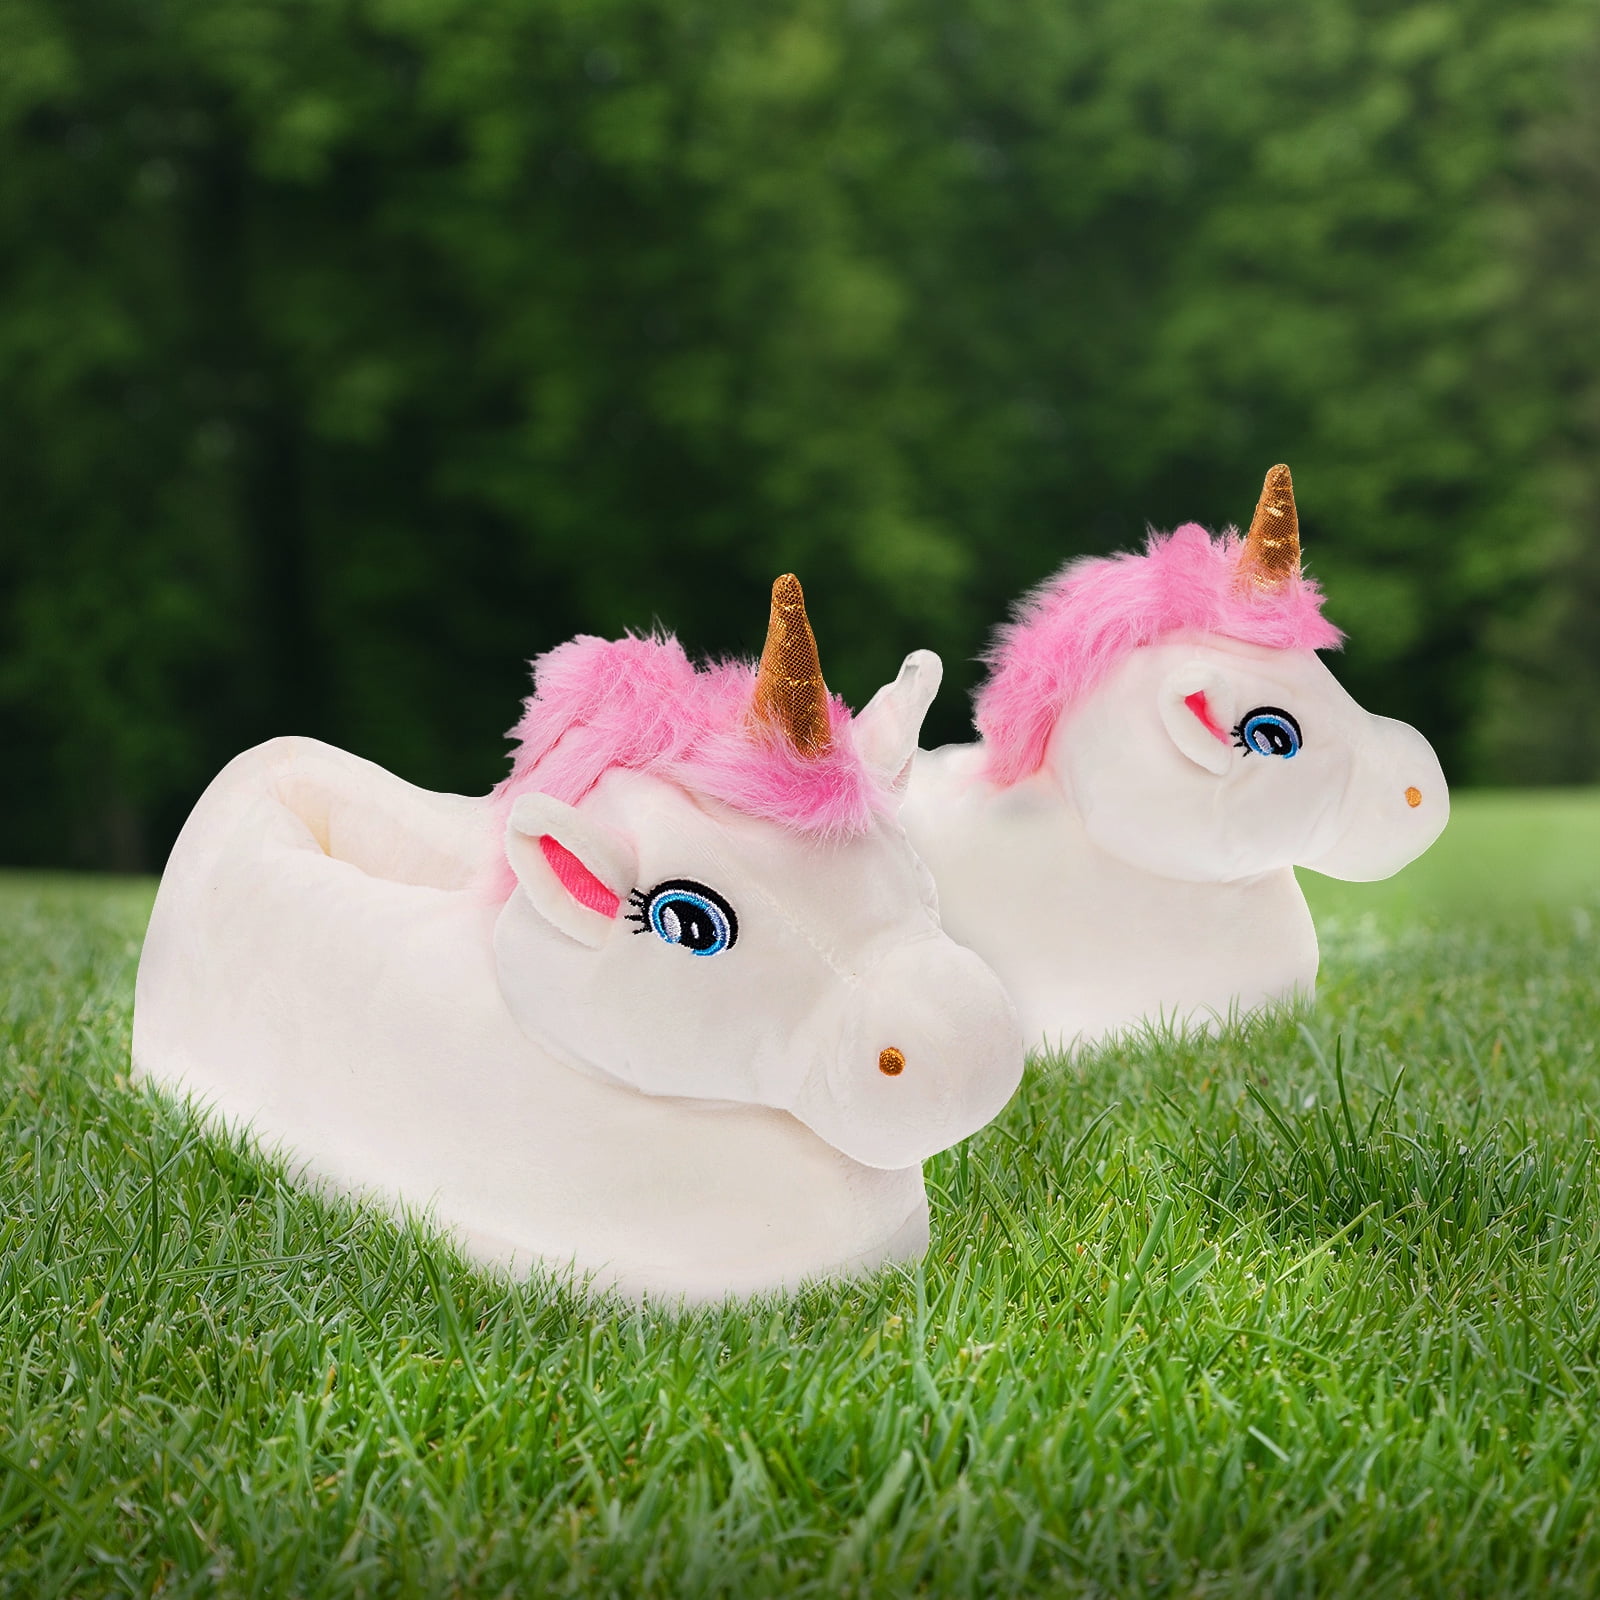 Silver Lilly - Unicorn Slippers Animal Slippers Novelty Shoe (White, Small) - Walmart.com